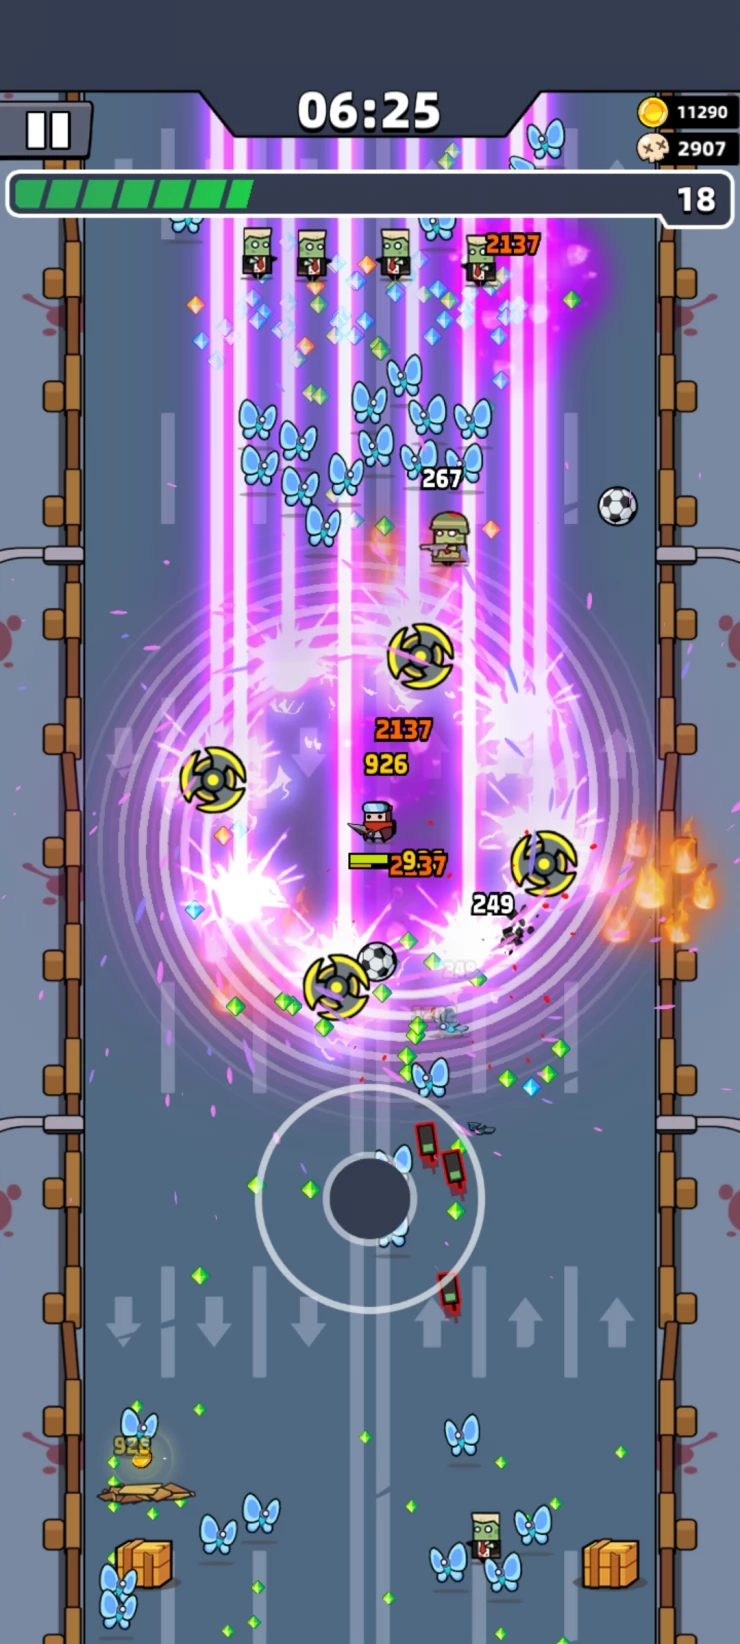 Death Ray - Evolution Skill of the Laser Launcher